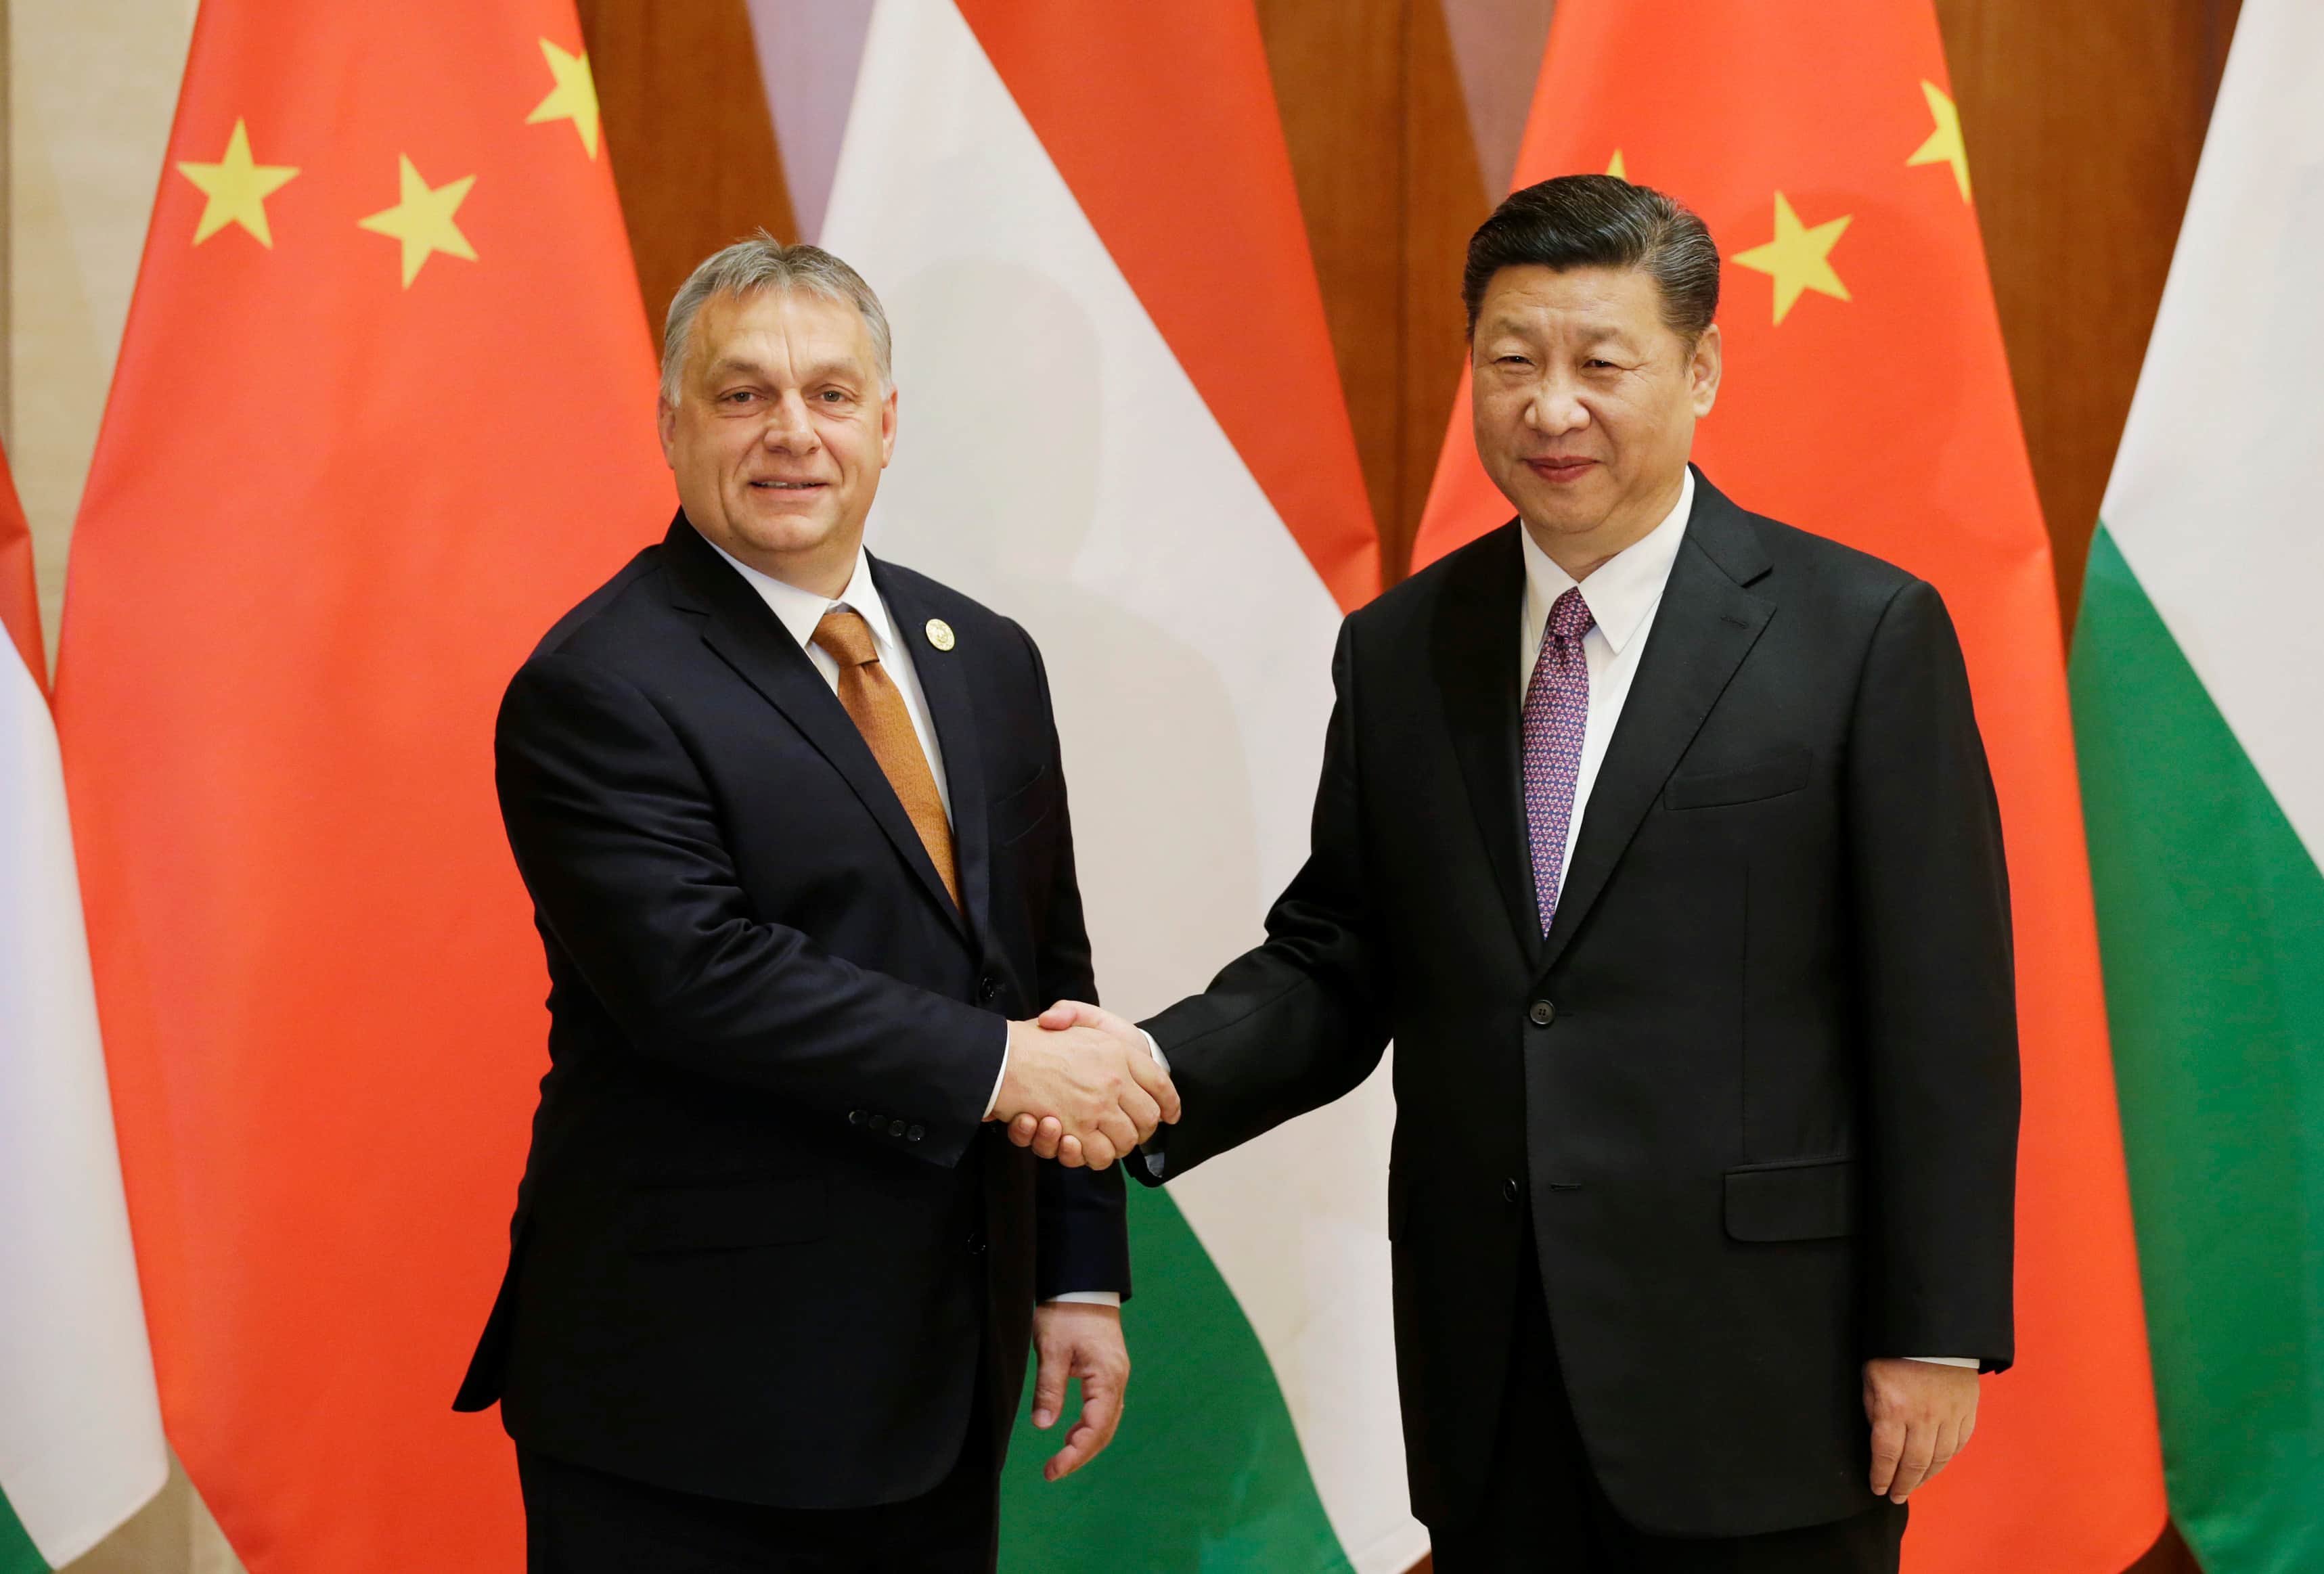 PRC Offers to Deepen Security, Law-Enforcement With Hungary